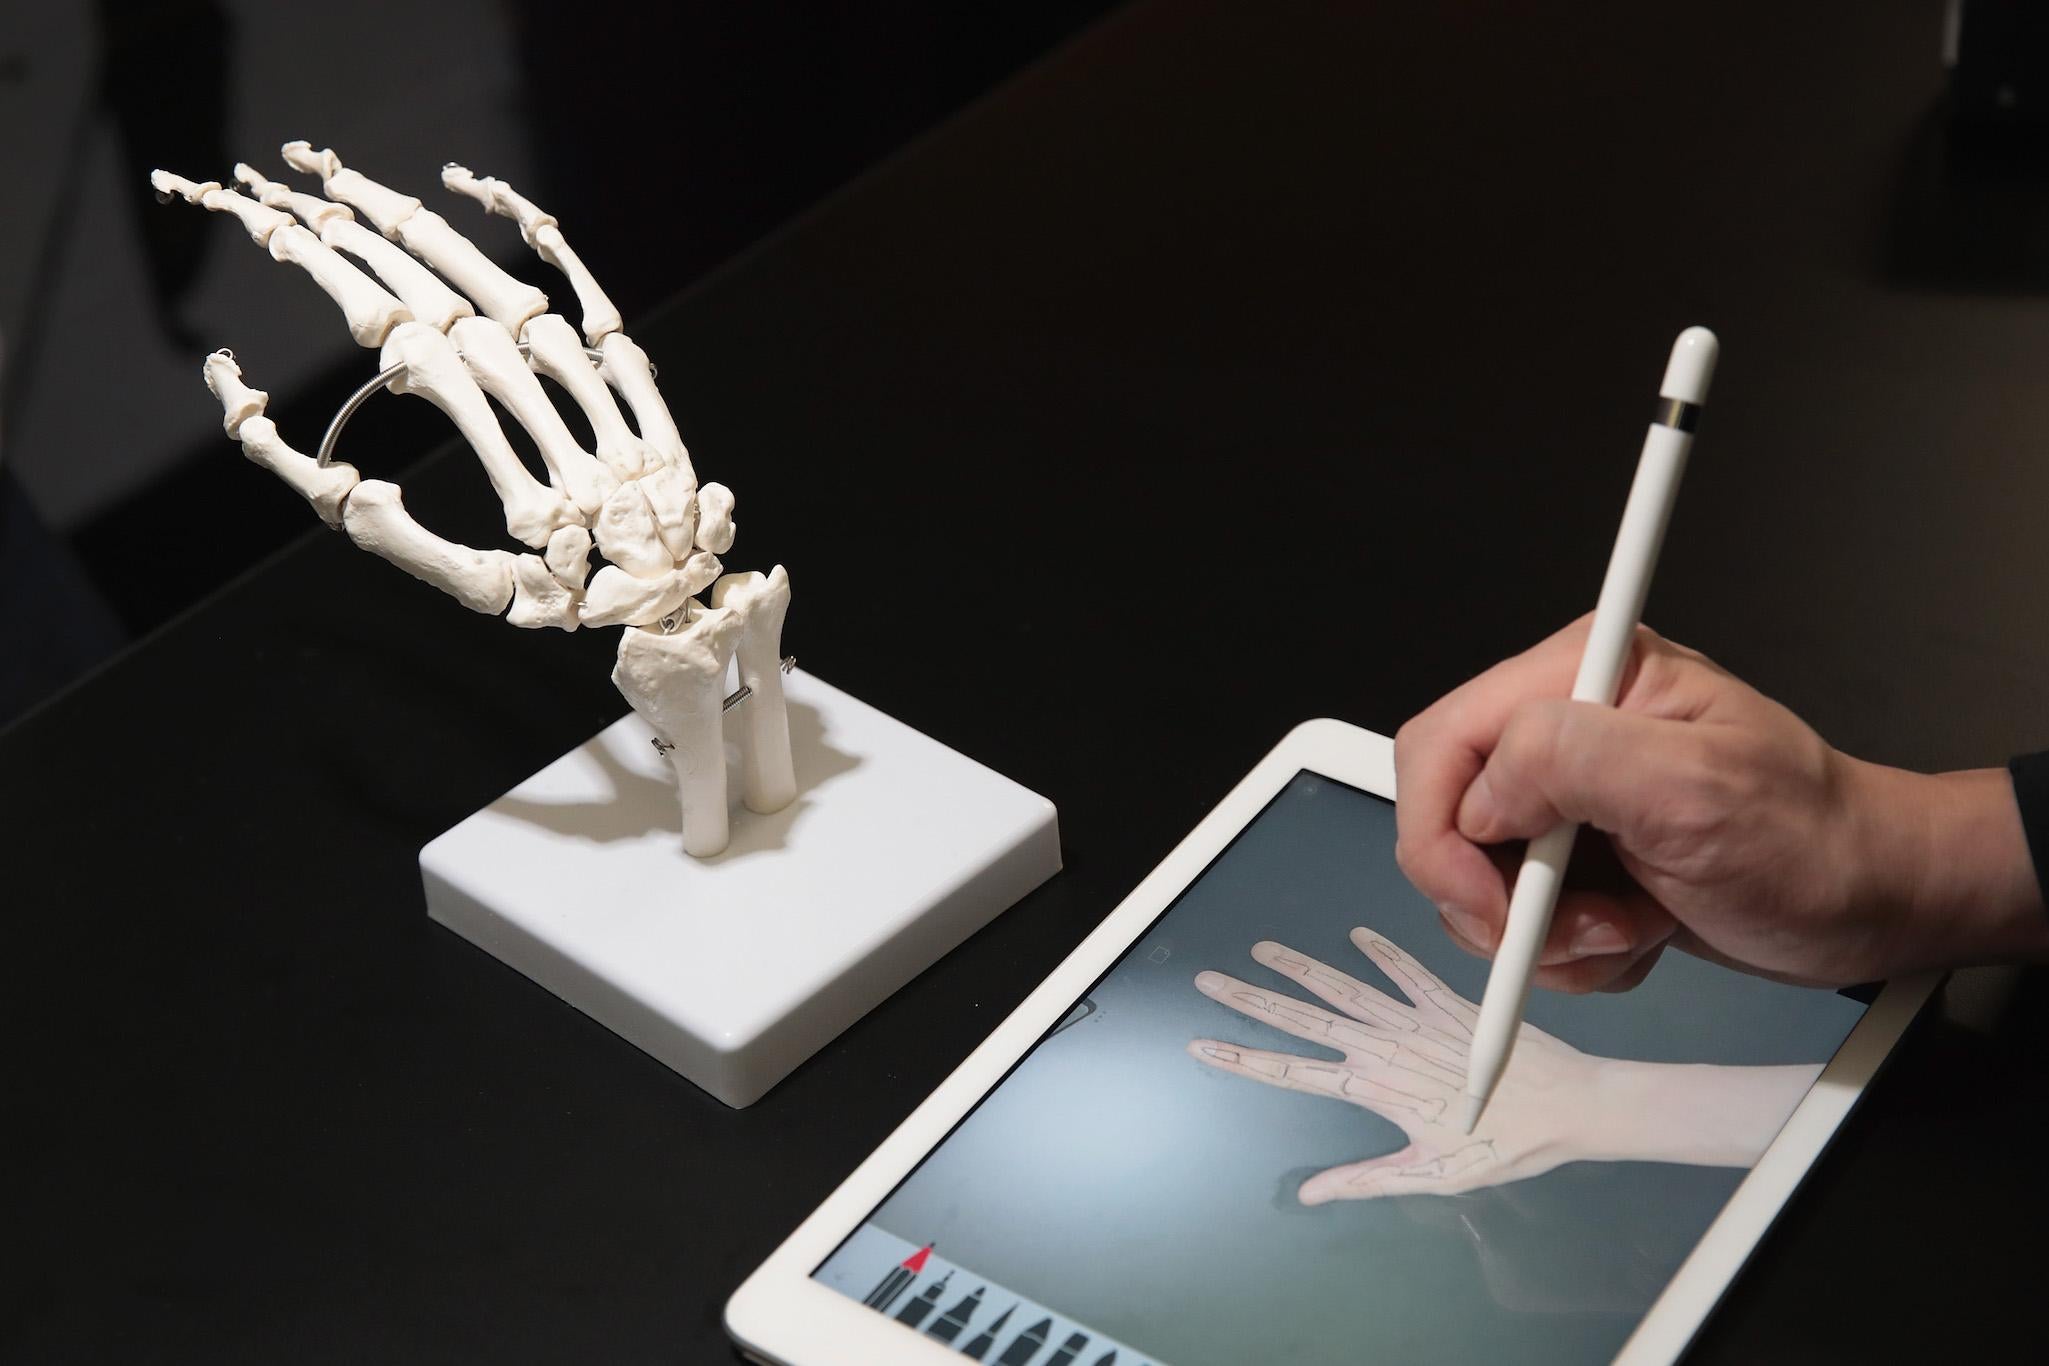 A guest draws the bones of the hand on Apple's new 9.7-inch iPad during an event held to introduce the device at Lane Tech College Prep High School on March 27, 2018 in Chicago, Illinois